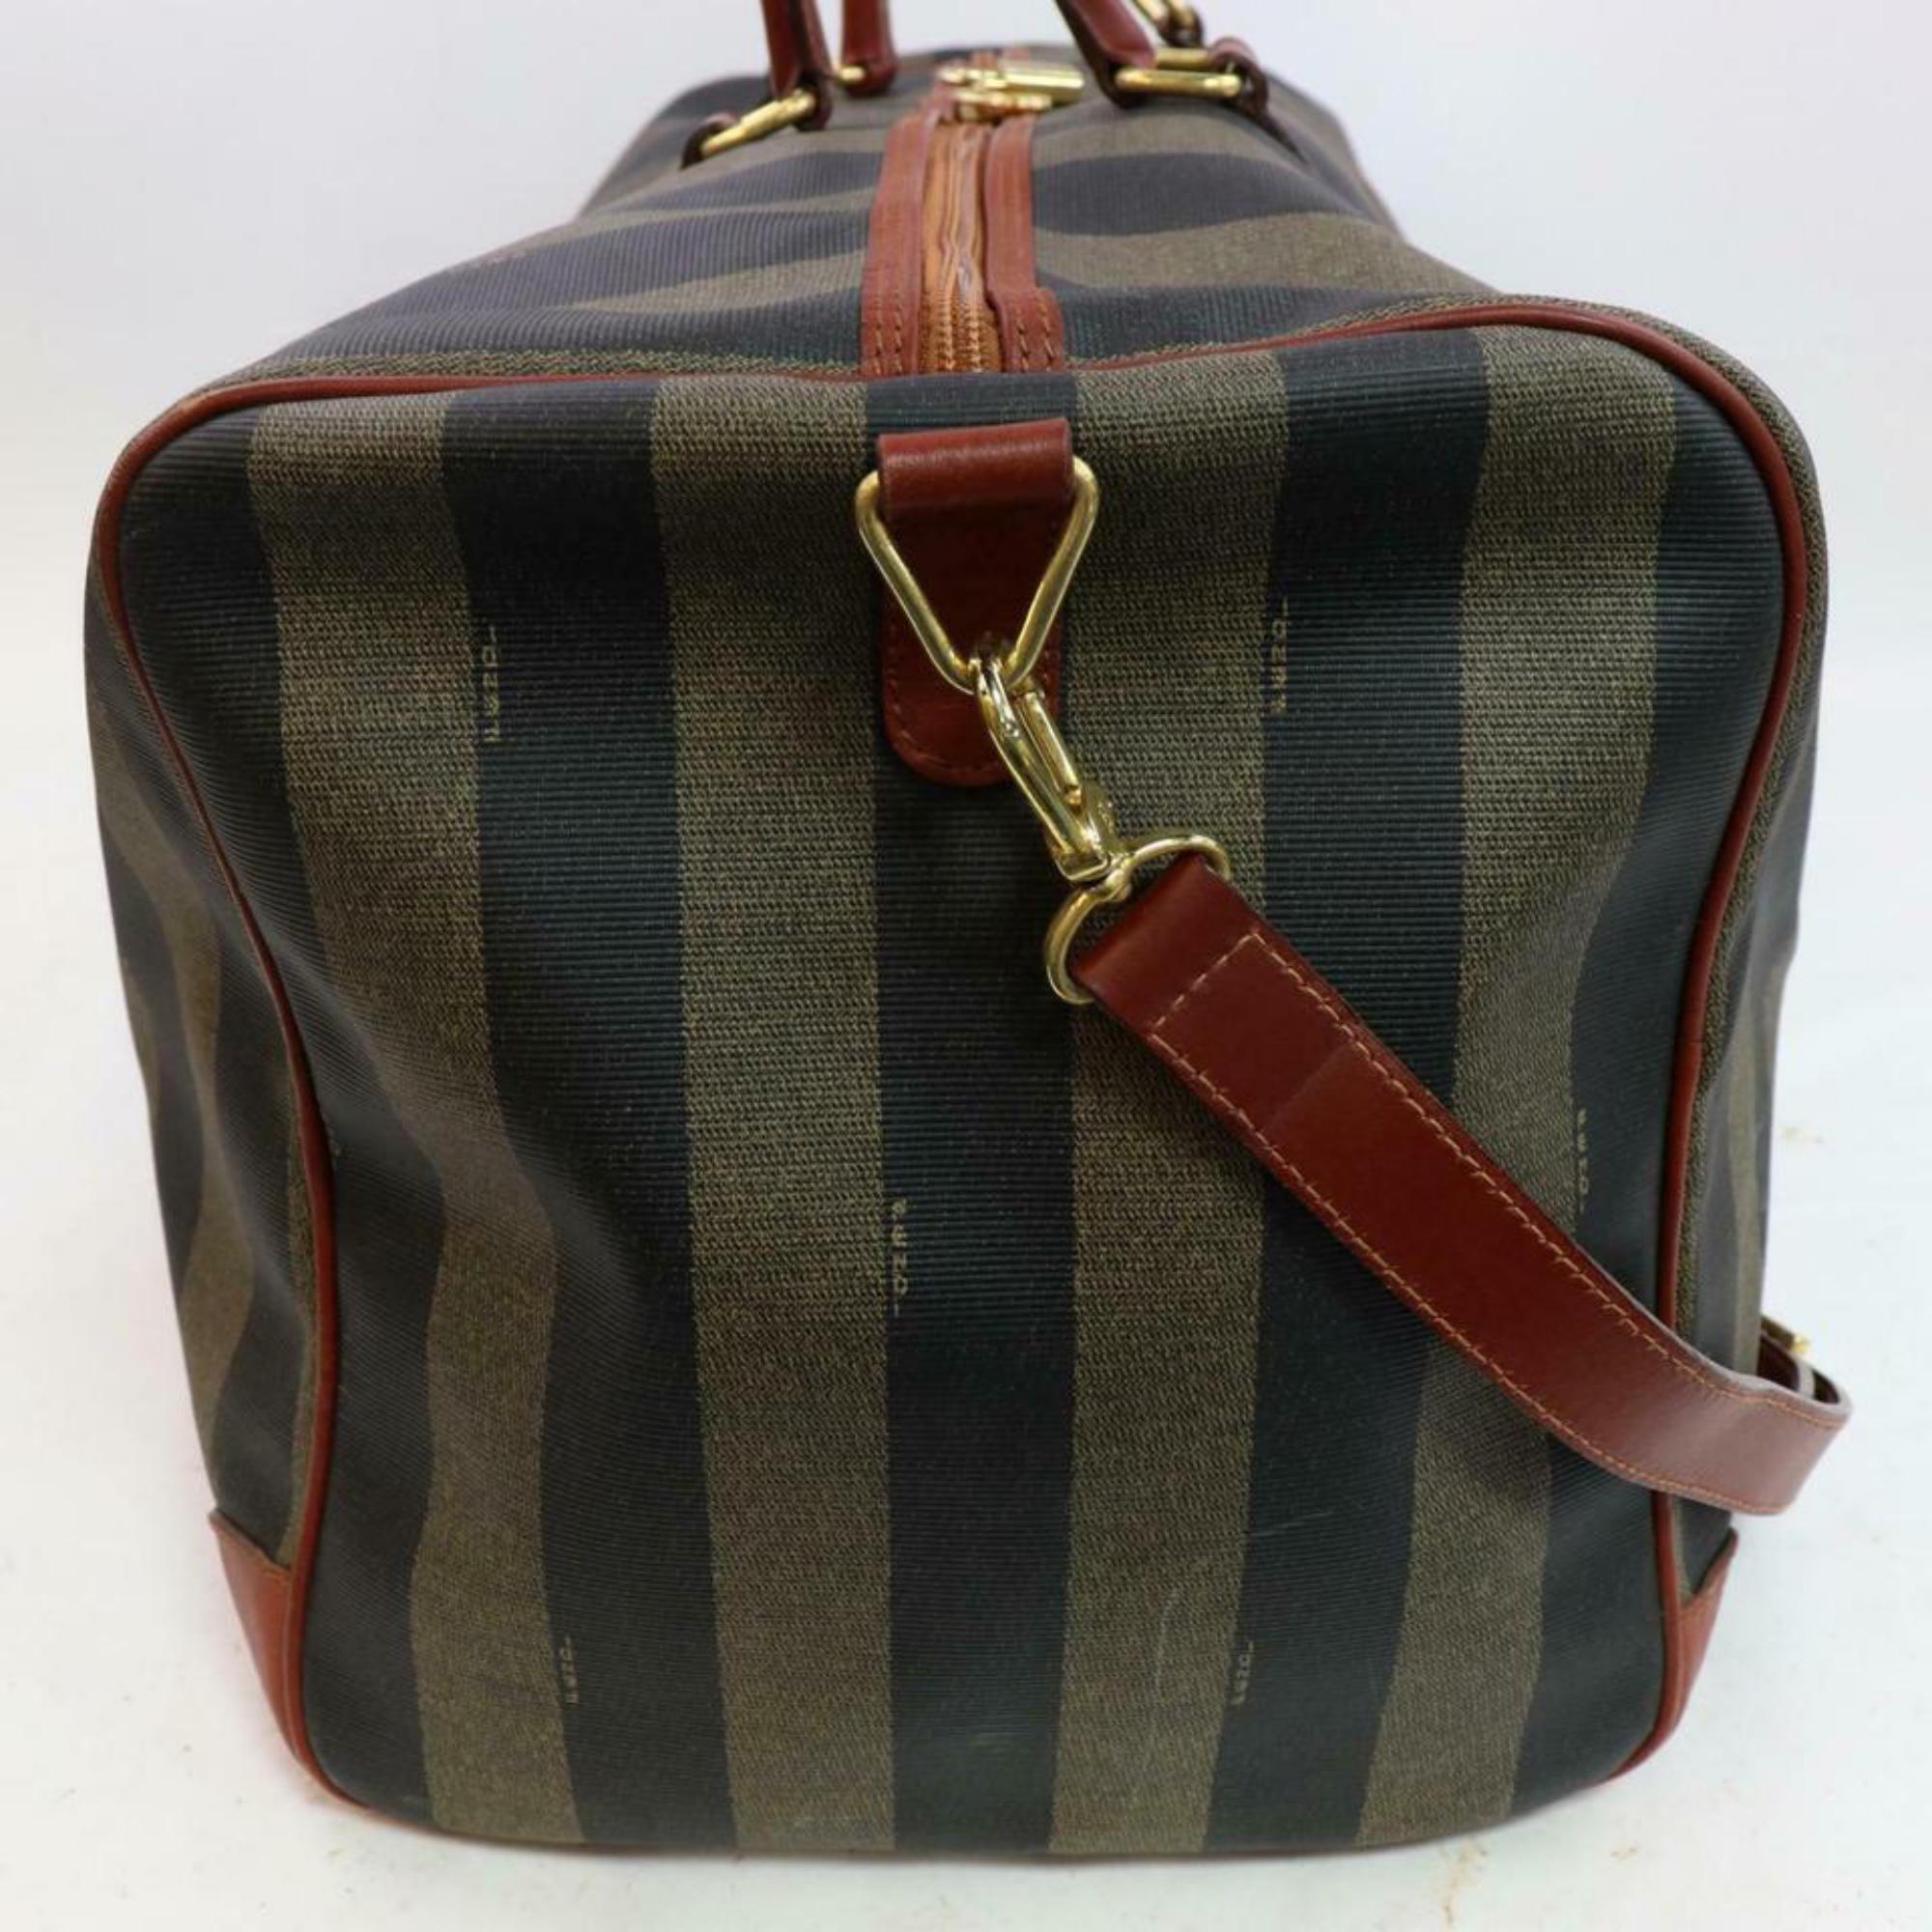 Fendi Duffle Extra Large Pequin Stripe Boston with Strap 870652 Brown Travel Bag For Sale 2